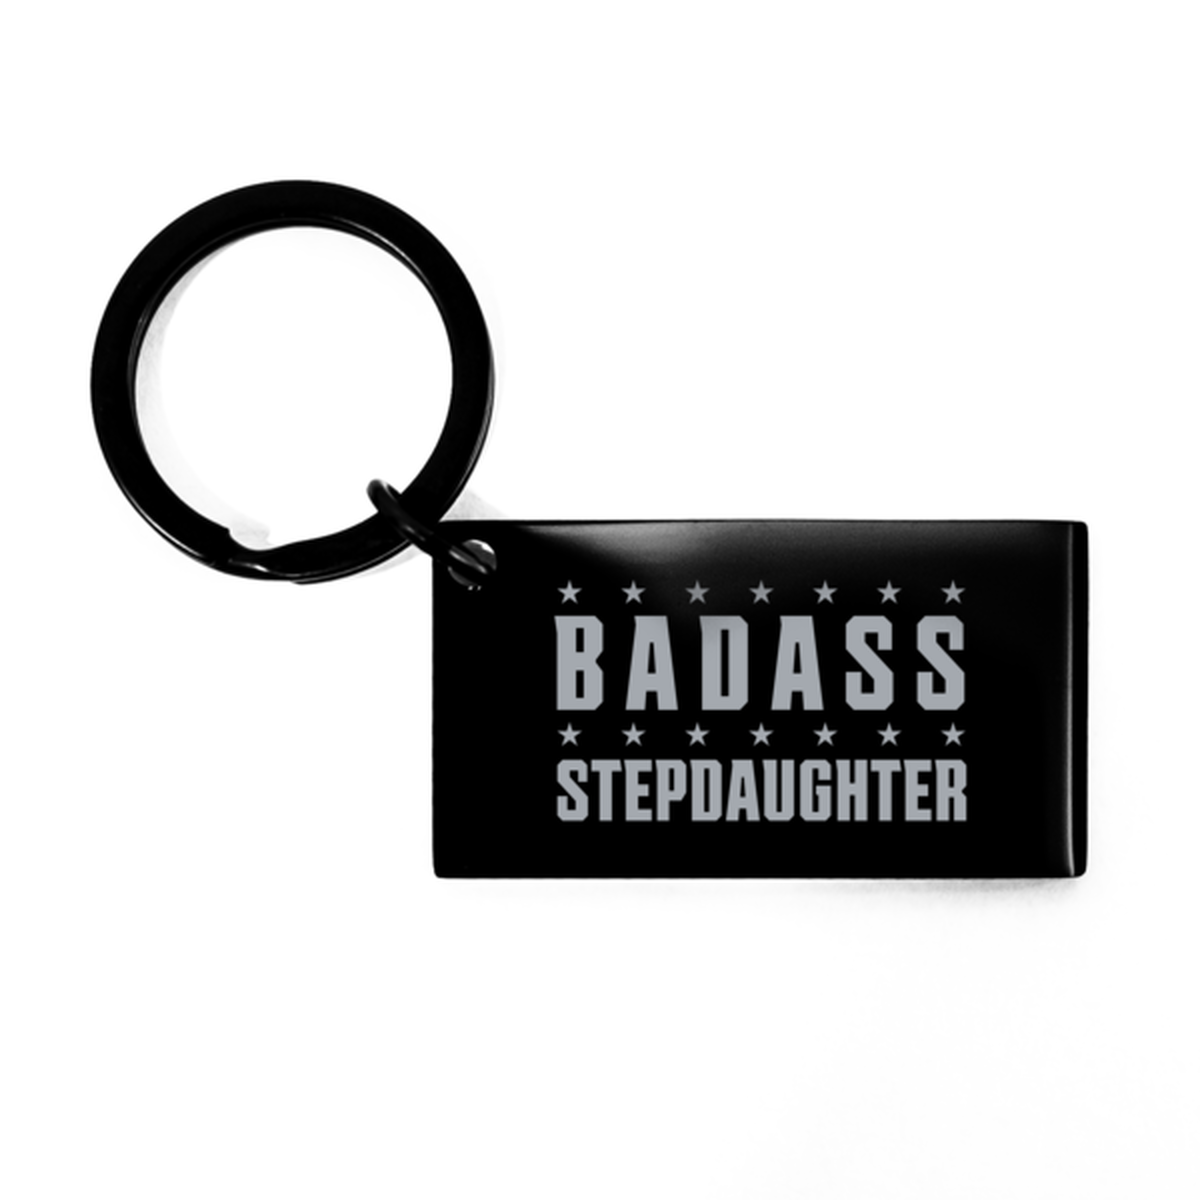 Stepdaughter Black Keychain, Badass Stepdaughter, Funny Family Gifts  Keyring For Stepdaughter From Brother Sister